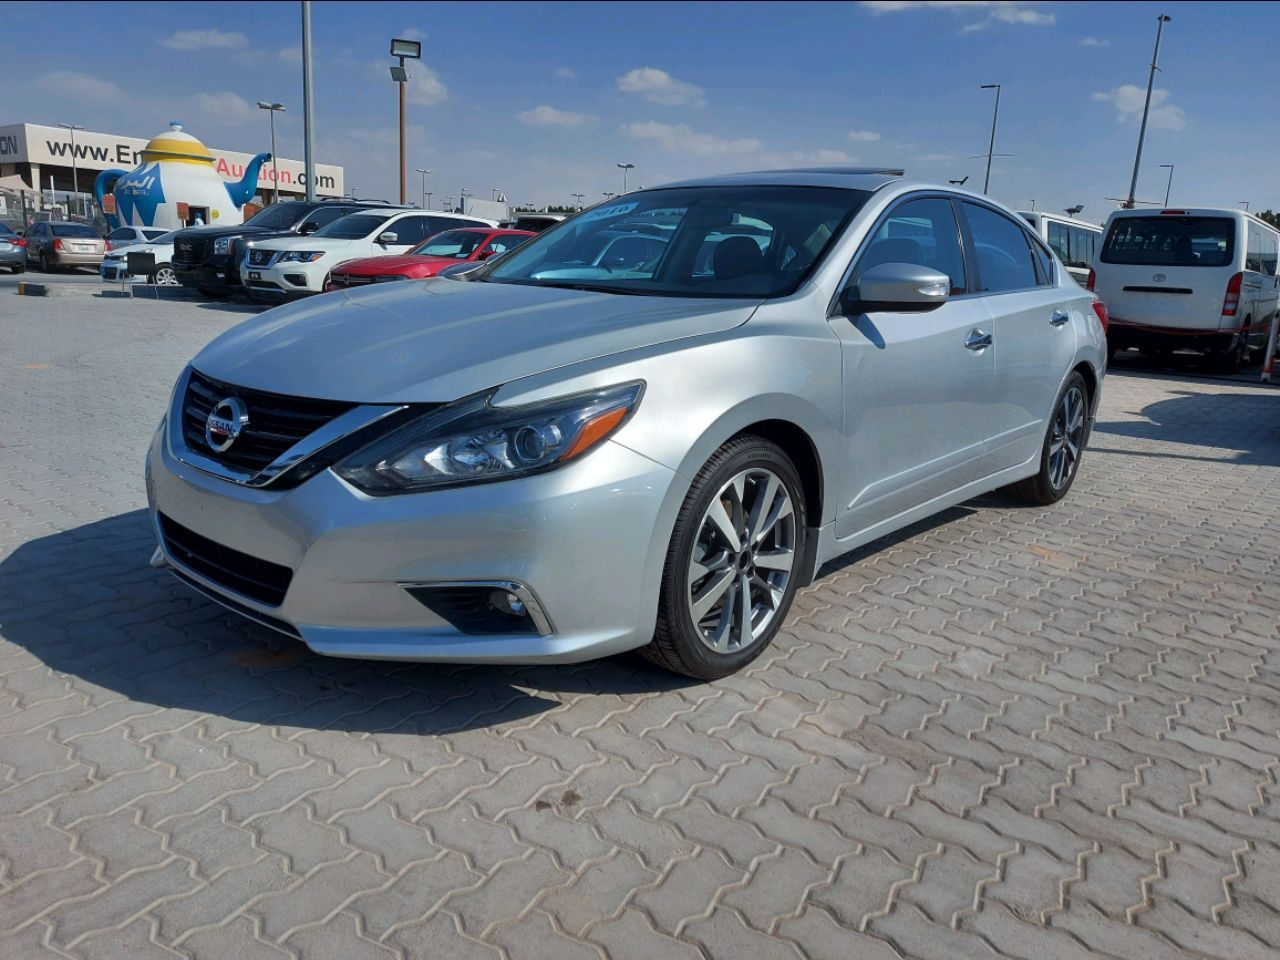 Nissan Altima 2016 AED 31,000, Good condition, US Spec, Sunroof, Navigation System, Fog Lights, Negotiable